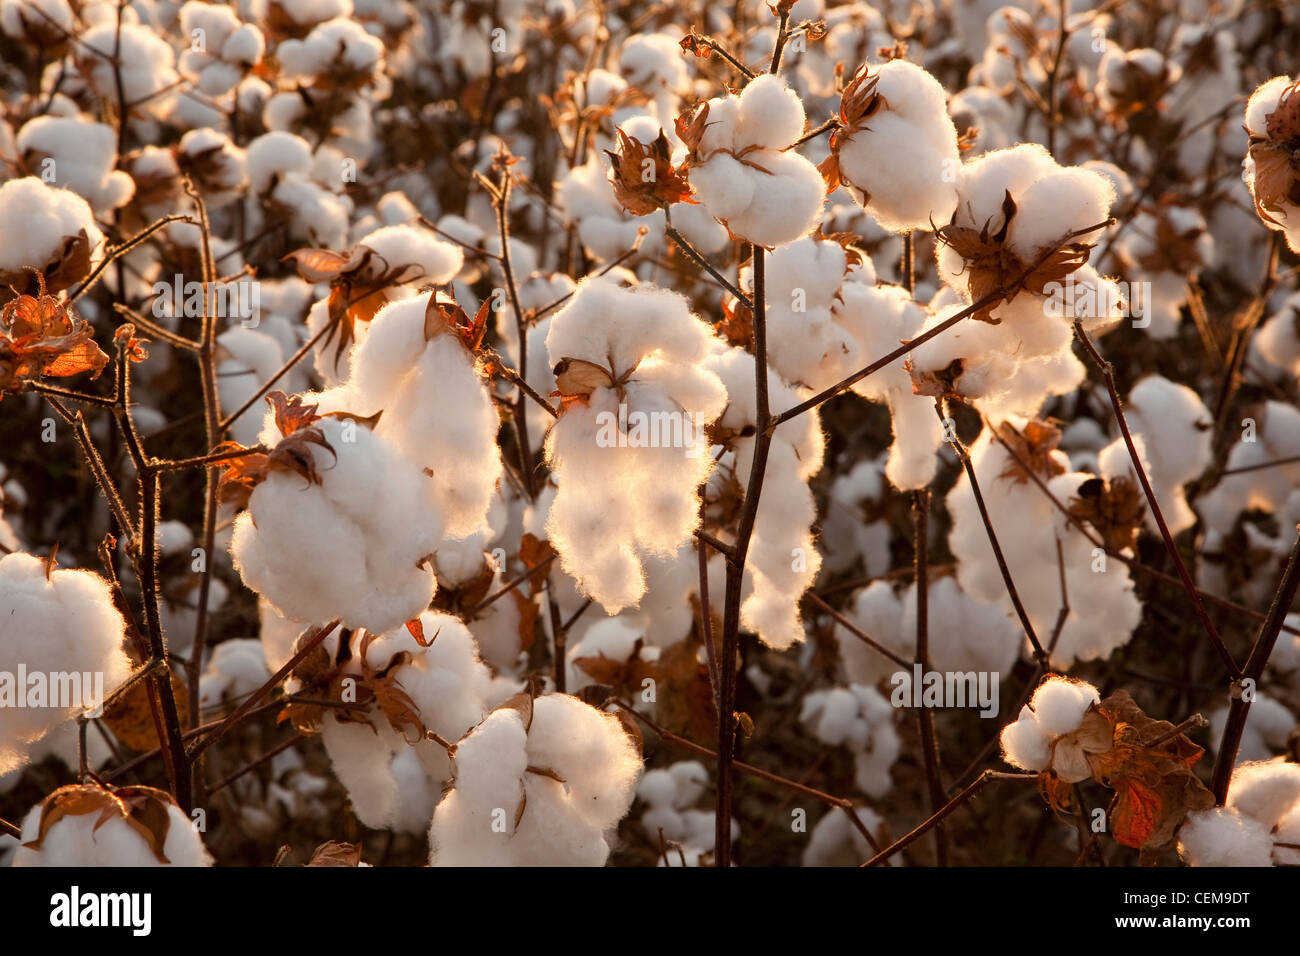 Agriculture - Closeup of mature high-yield open cotton bolls at harvest stage backlit by late afternoon sunlight / Arkansas, USA Stock Photo